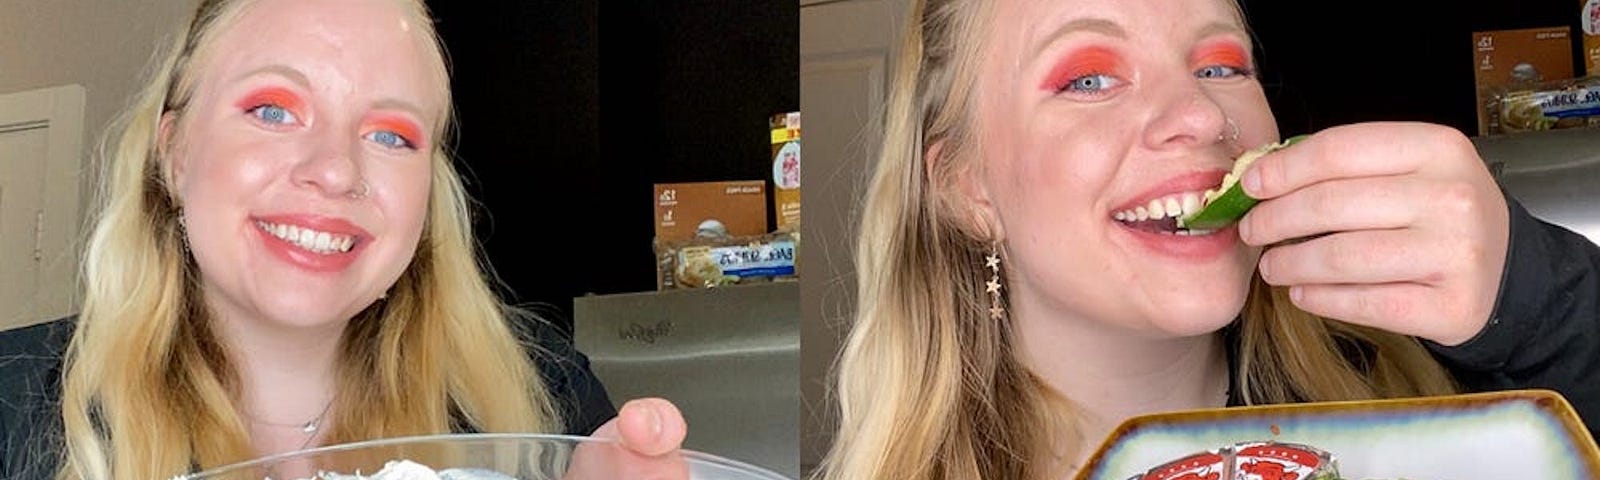 Side-by-side photos featuring the author eating healthy snacks.